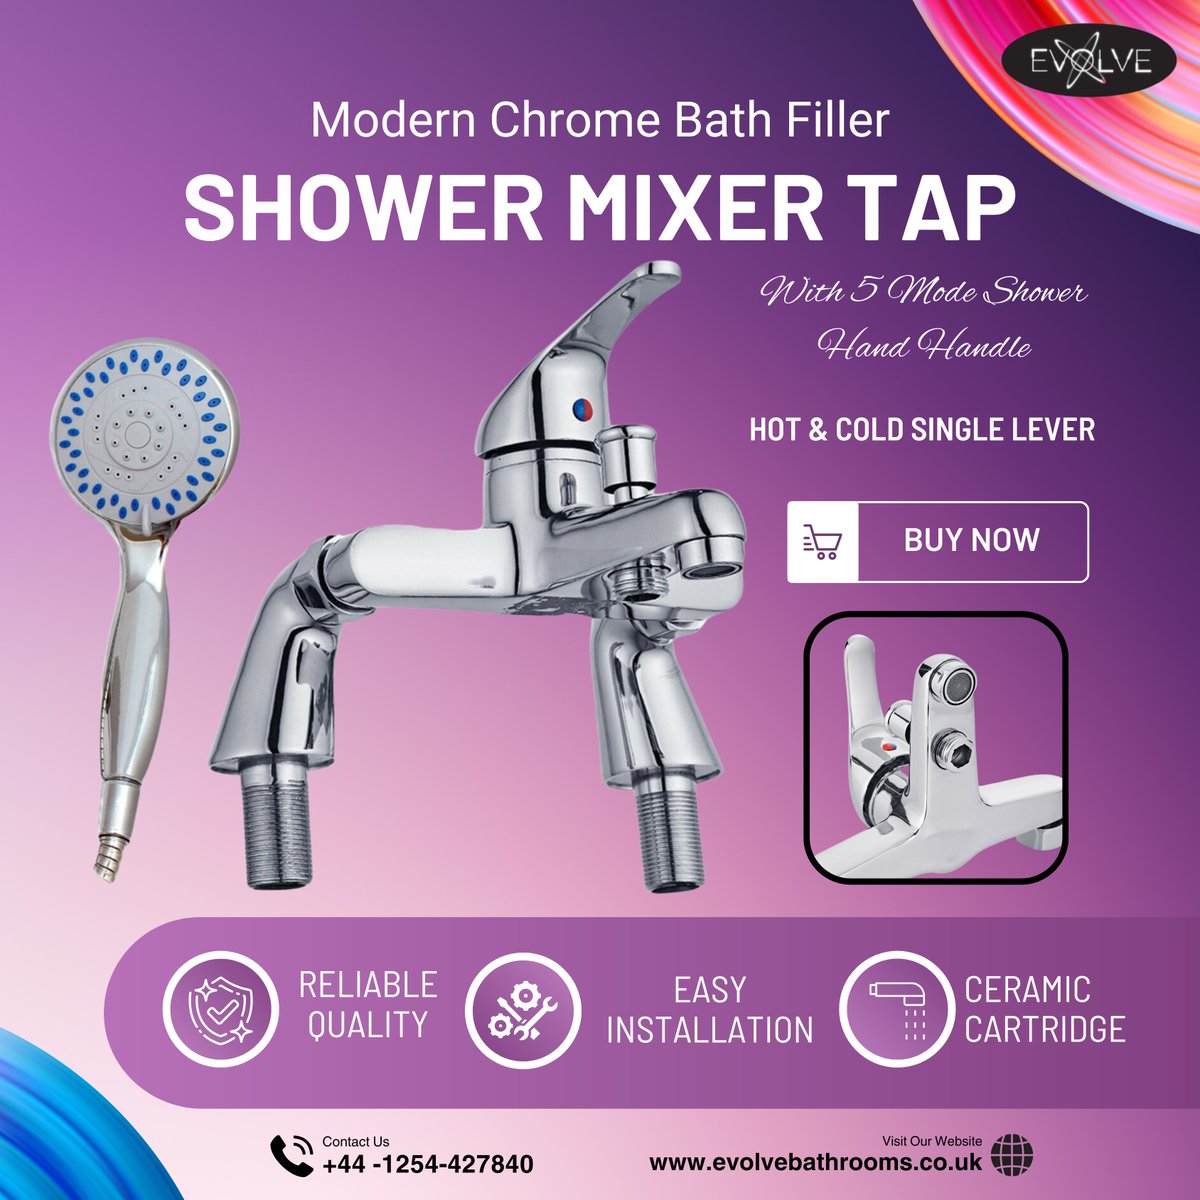 🚿 Elevate your bathroom experience with 𝐌𝐨𝐝𝐞𝐫𝐧 𝐂𝐡𝐫𝐨𝐦𝐞 𝐁𝐚𝐭𝐡 𝐅𝐢𝐥𝐥𝐞𝐫 𝐒𝐡𝐨𝐰𝐞𝐫 𝐌𝐢𝐱𝐞𝐫 𝐓𝐚𝐩 🏃‍♂️ Visit us now: bit.ly/3WoWHGE or enquire at +𝟒𝟒-𝟏𝟐𝟓𝟒-𝟒𝟐𝟕𝟖𝟒𝟎. 📞
.
.
.
.

#LuxuryLiving #BathroomUpgrade #HomeImprovement #BathroomUpgrade